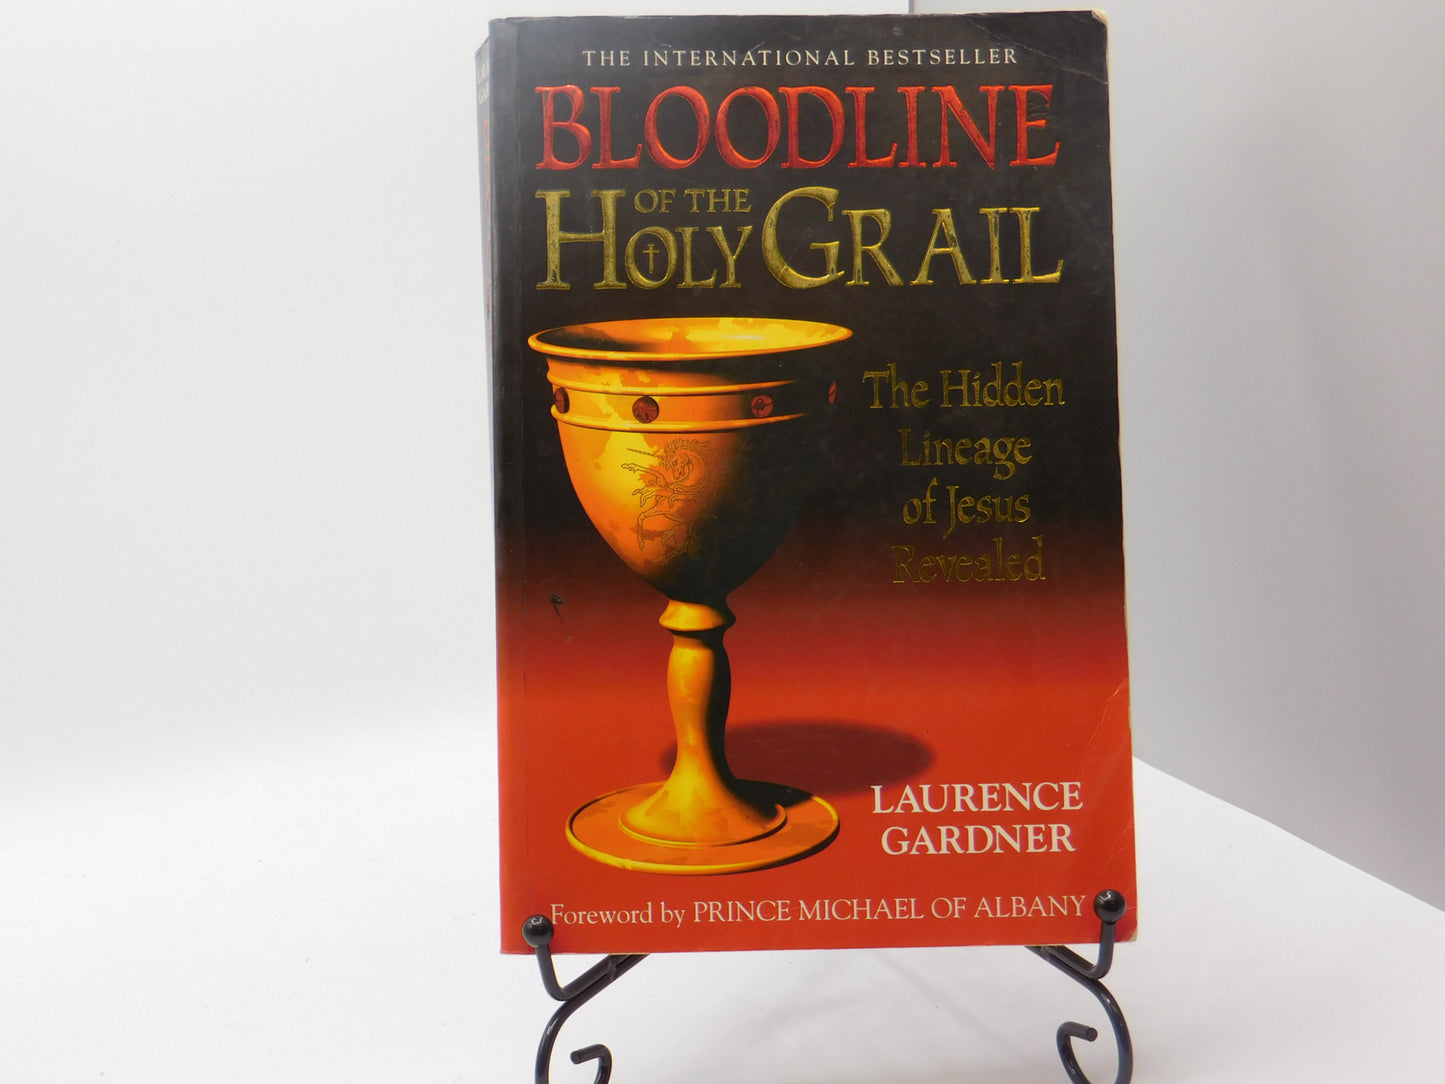 Bloodline of the Holy Grail by Laurence Gardner